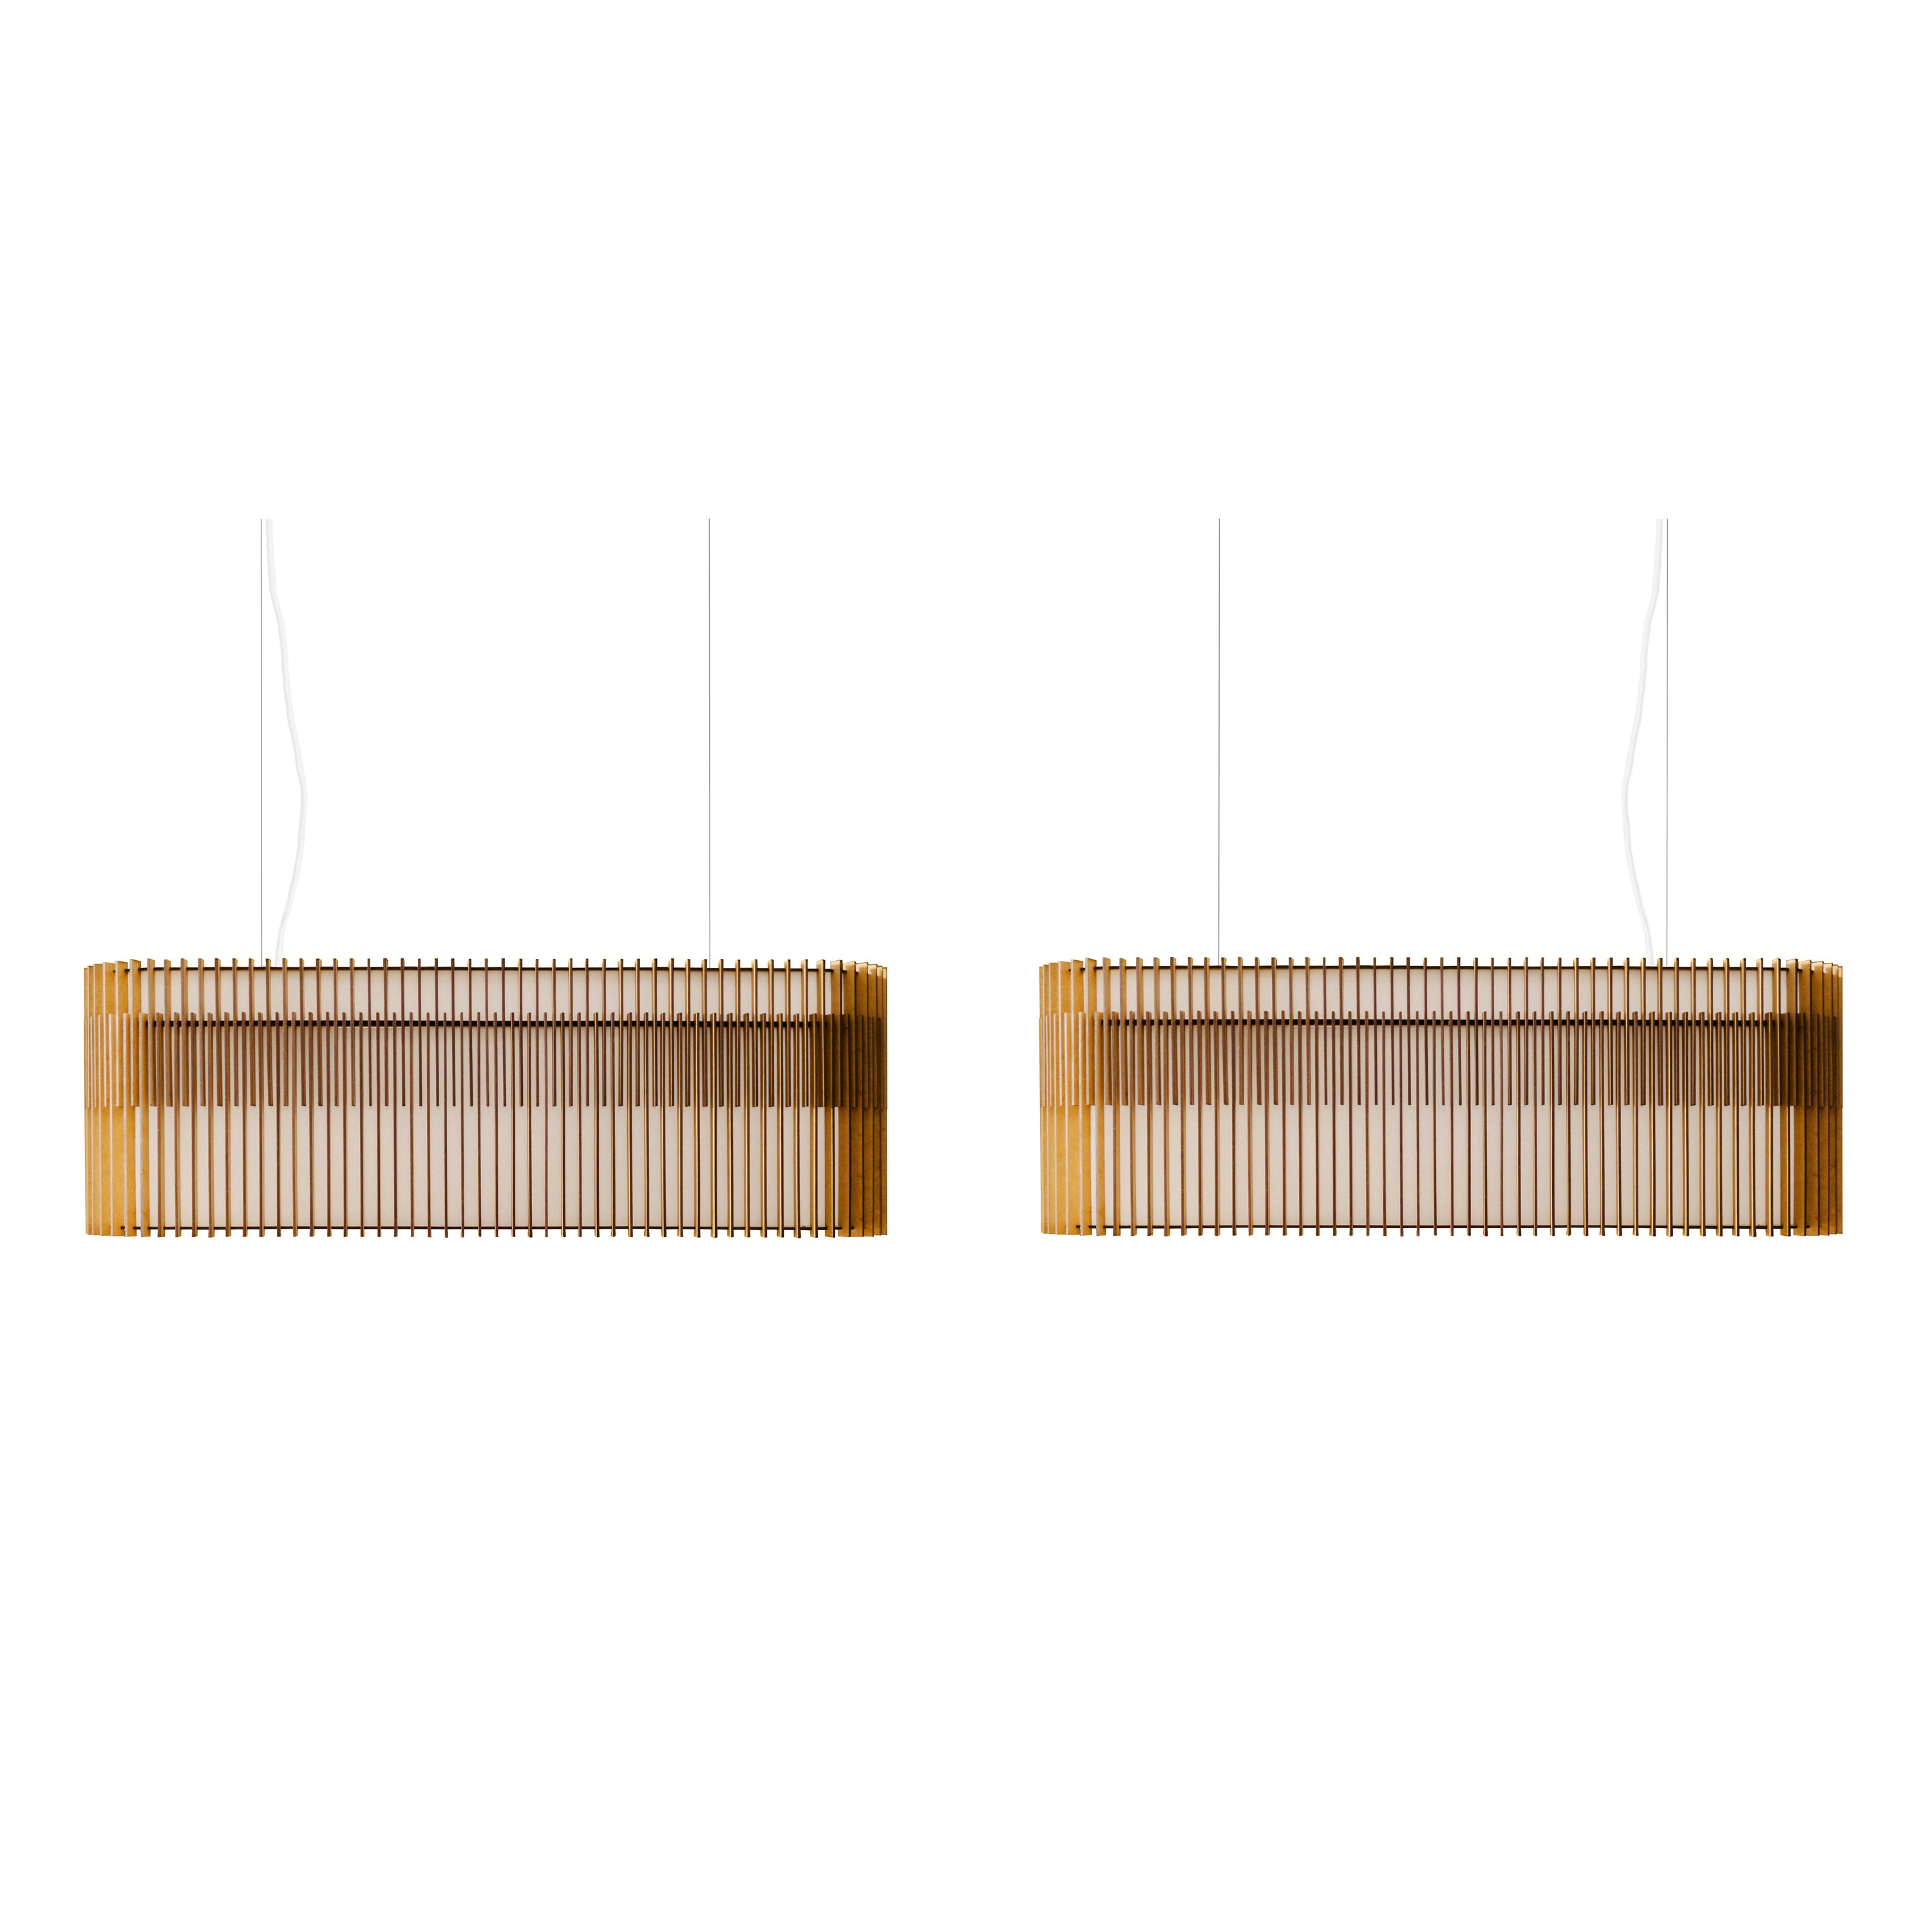 Set of two Pendant Lamps, Handmade, Mdf Wood, 2 units x 31.49'' Long, L800 x 2 For Sale